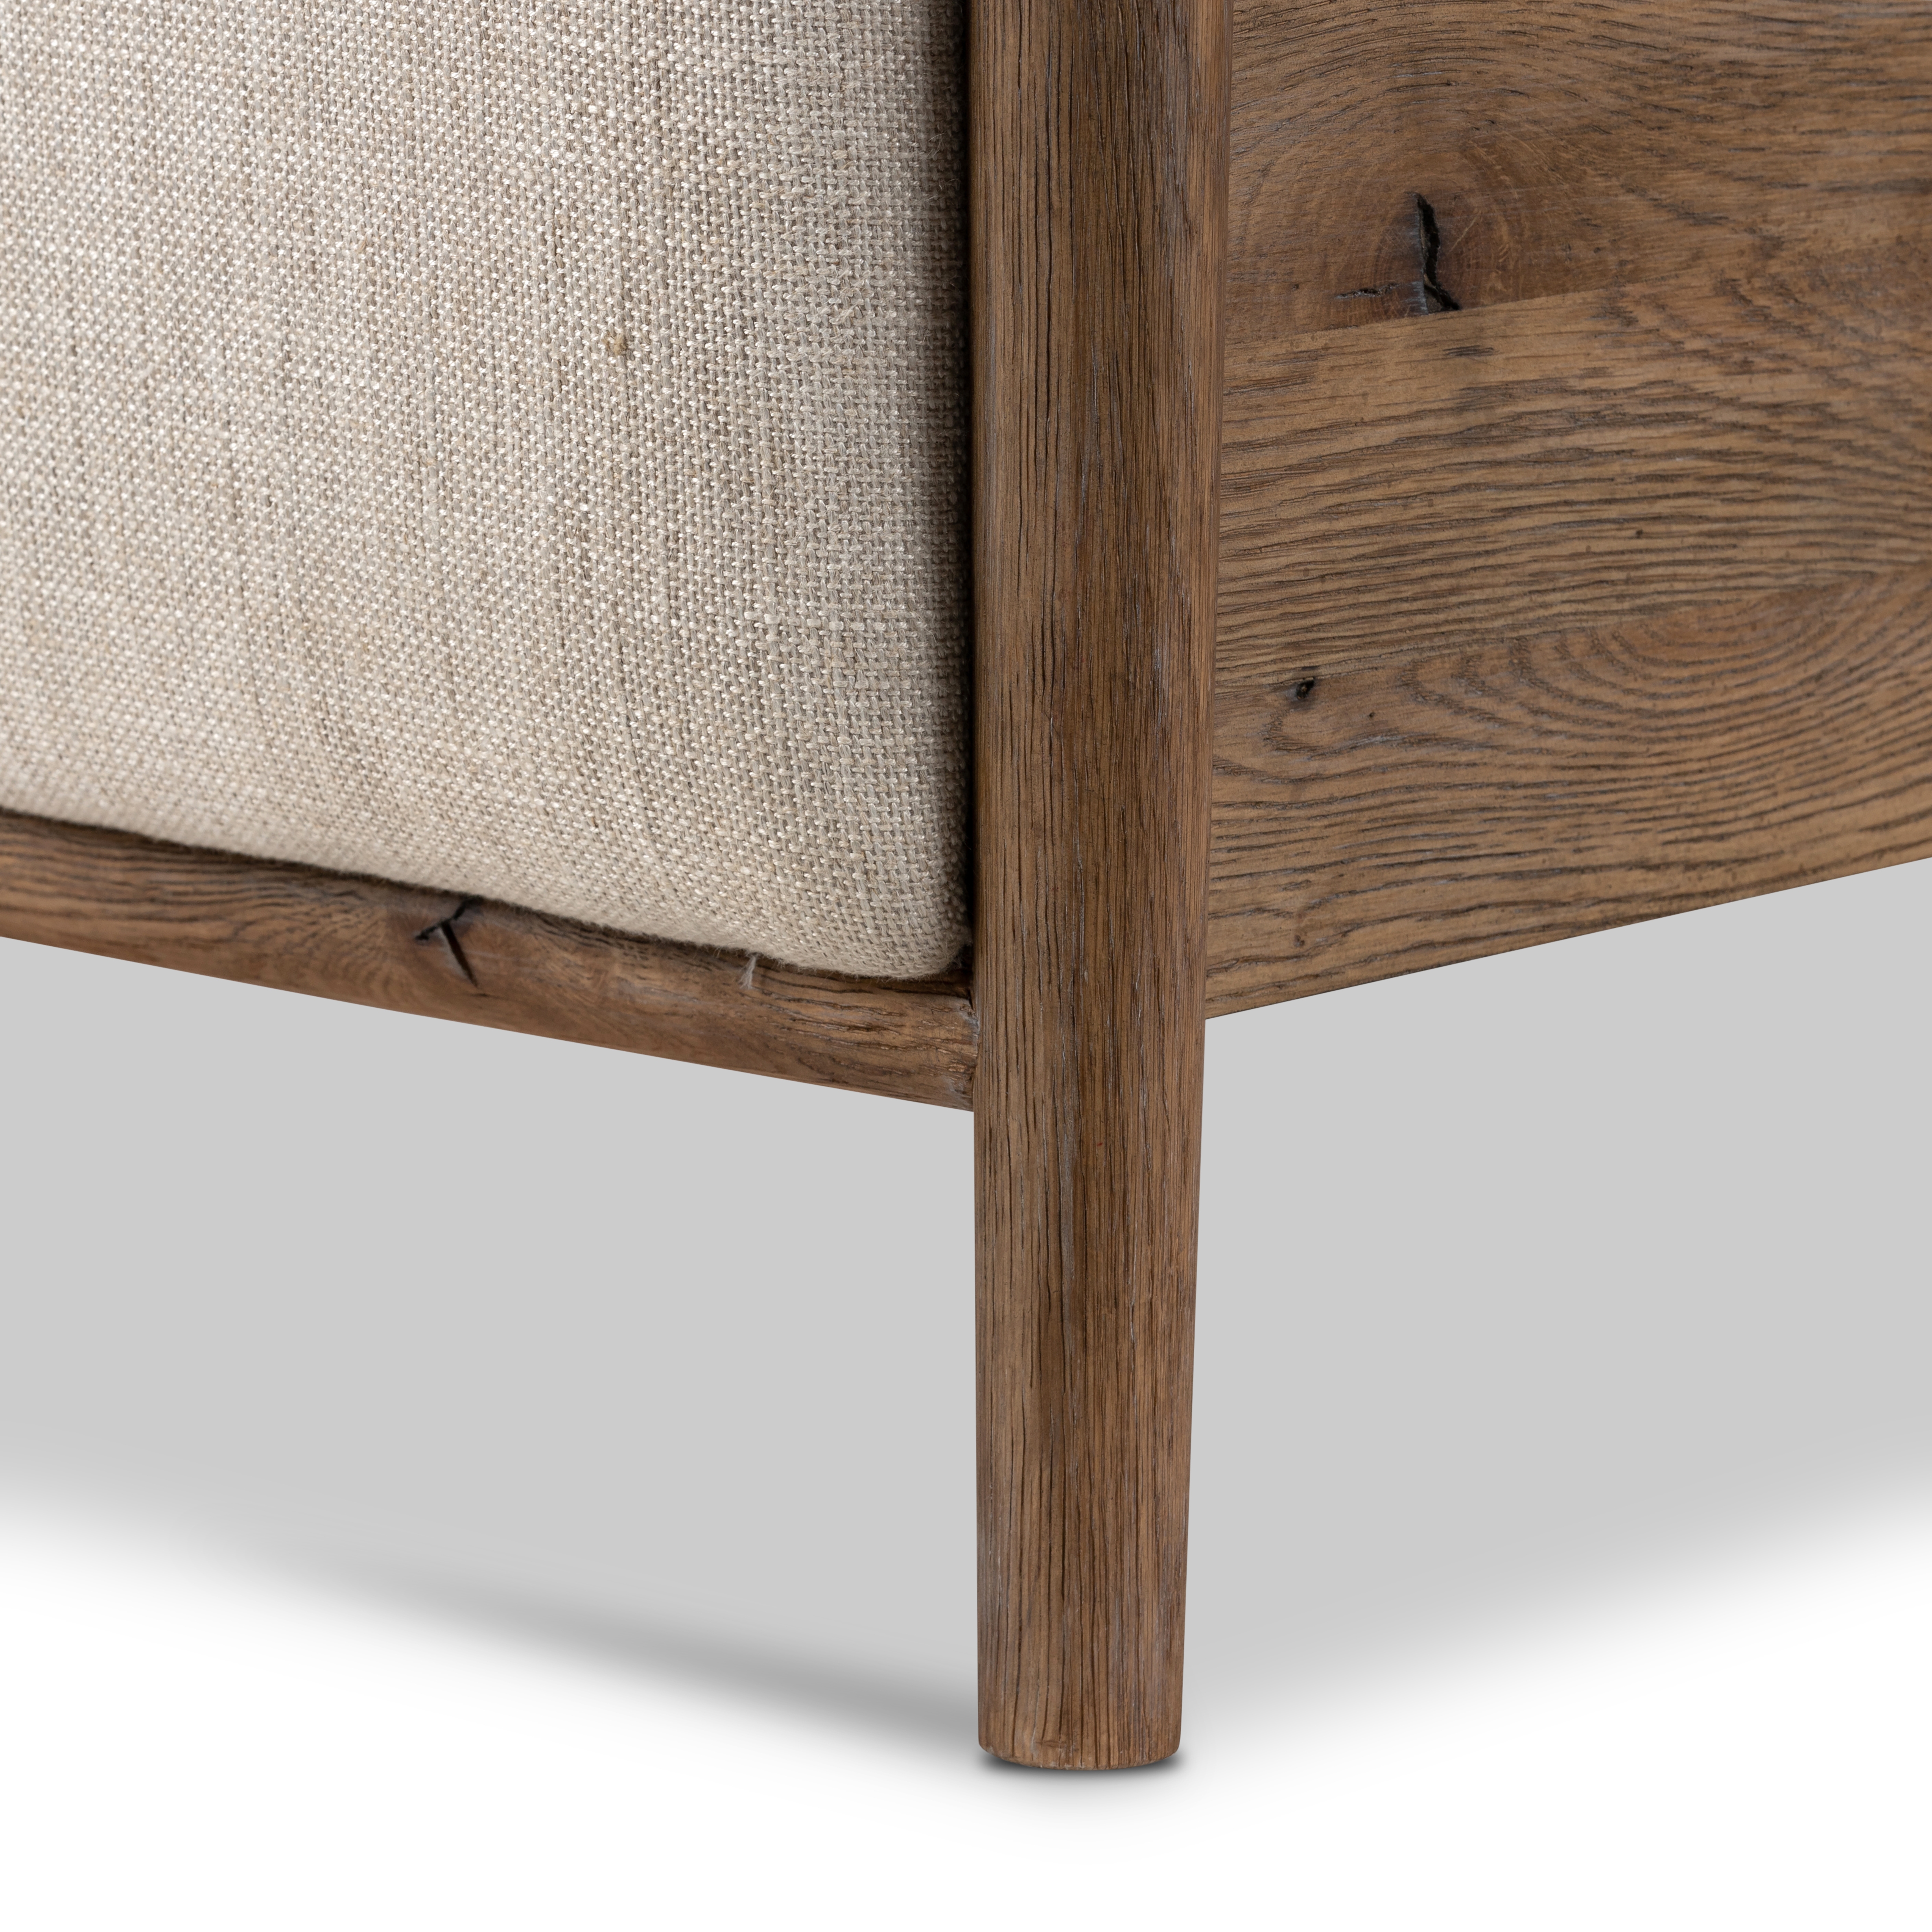 Glenview Bed-Weathered Oak-Queen - Image 9